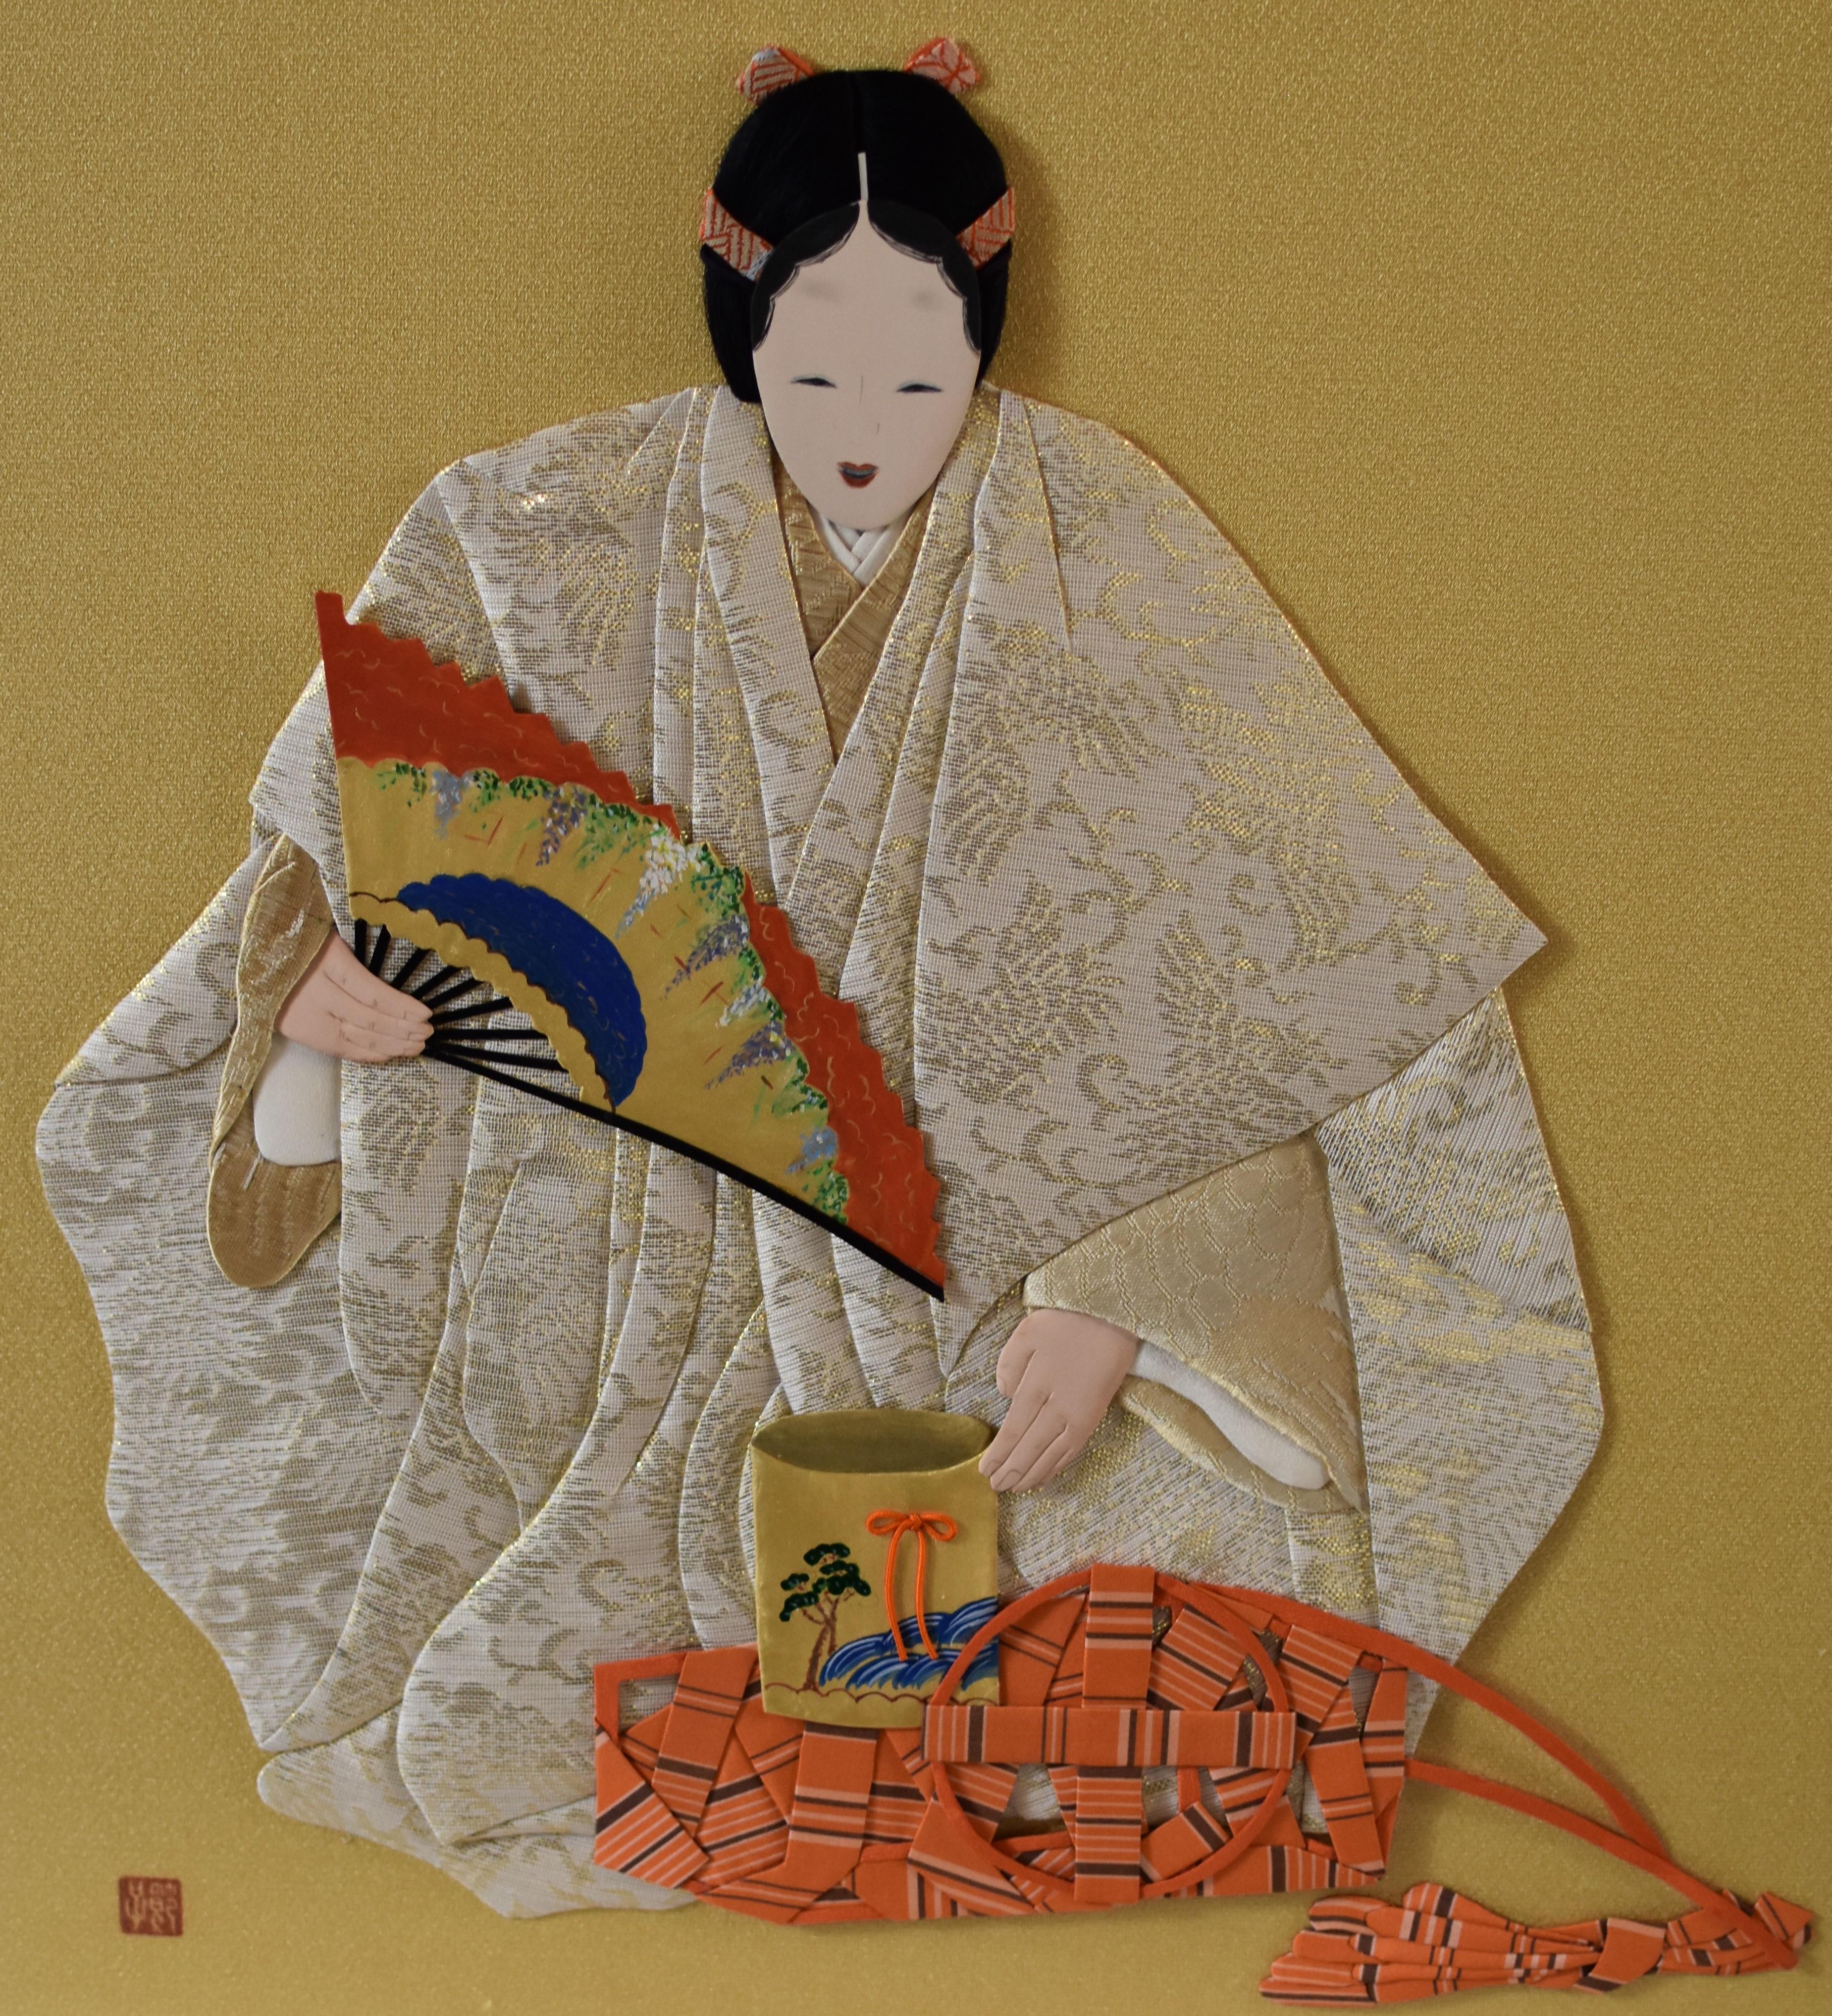 Unique exquisite Japanese contemporary framed traditional decorative handcrafted art form known as oshie (literally, “pressed pictures”) that goes back to the Edo period (1603-1868). Exceptional famed oshie piece in gold, cream and orange depicts a